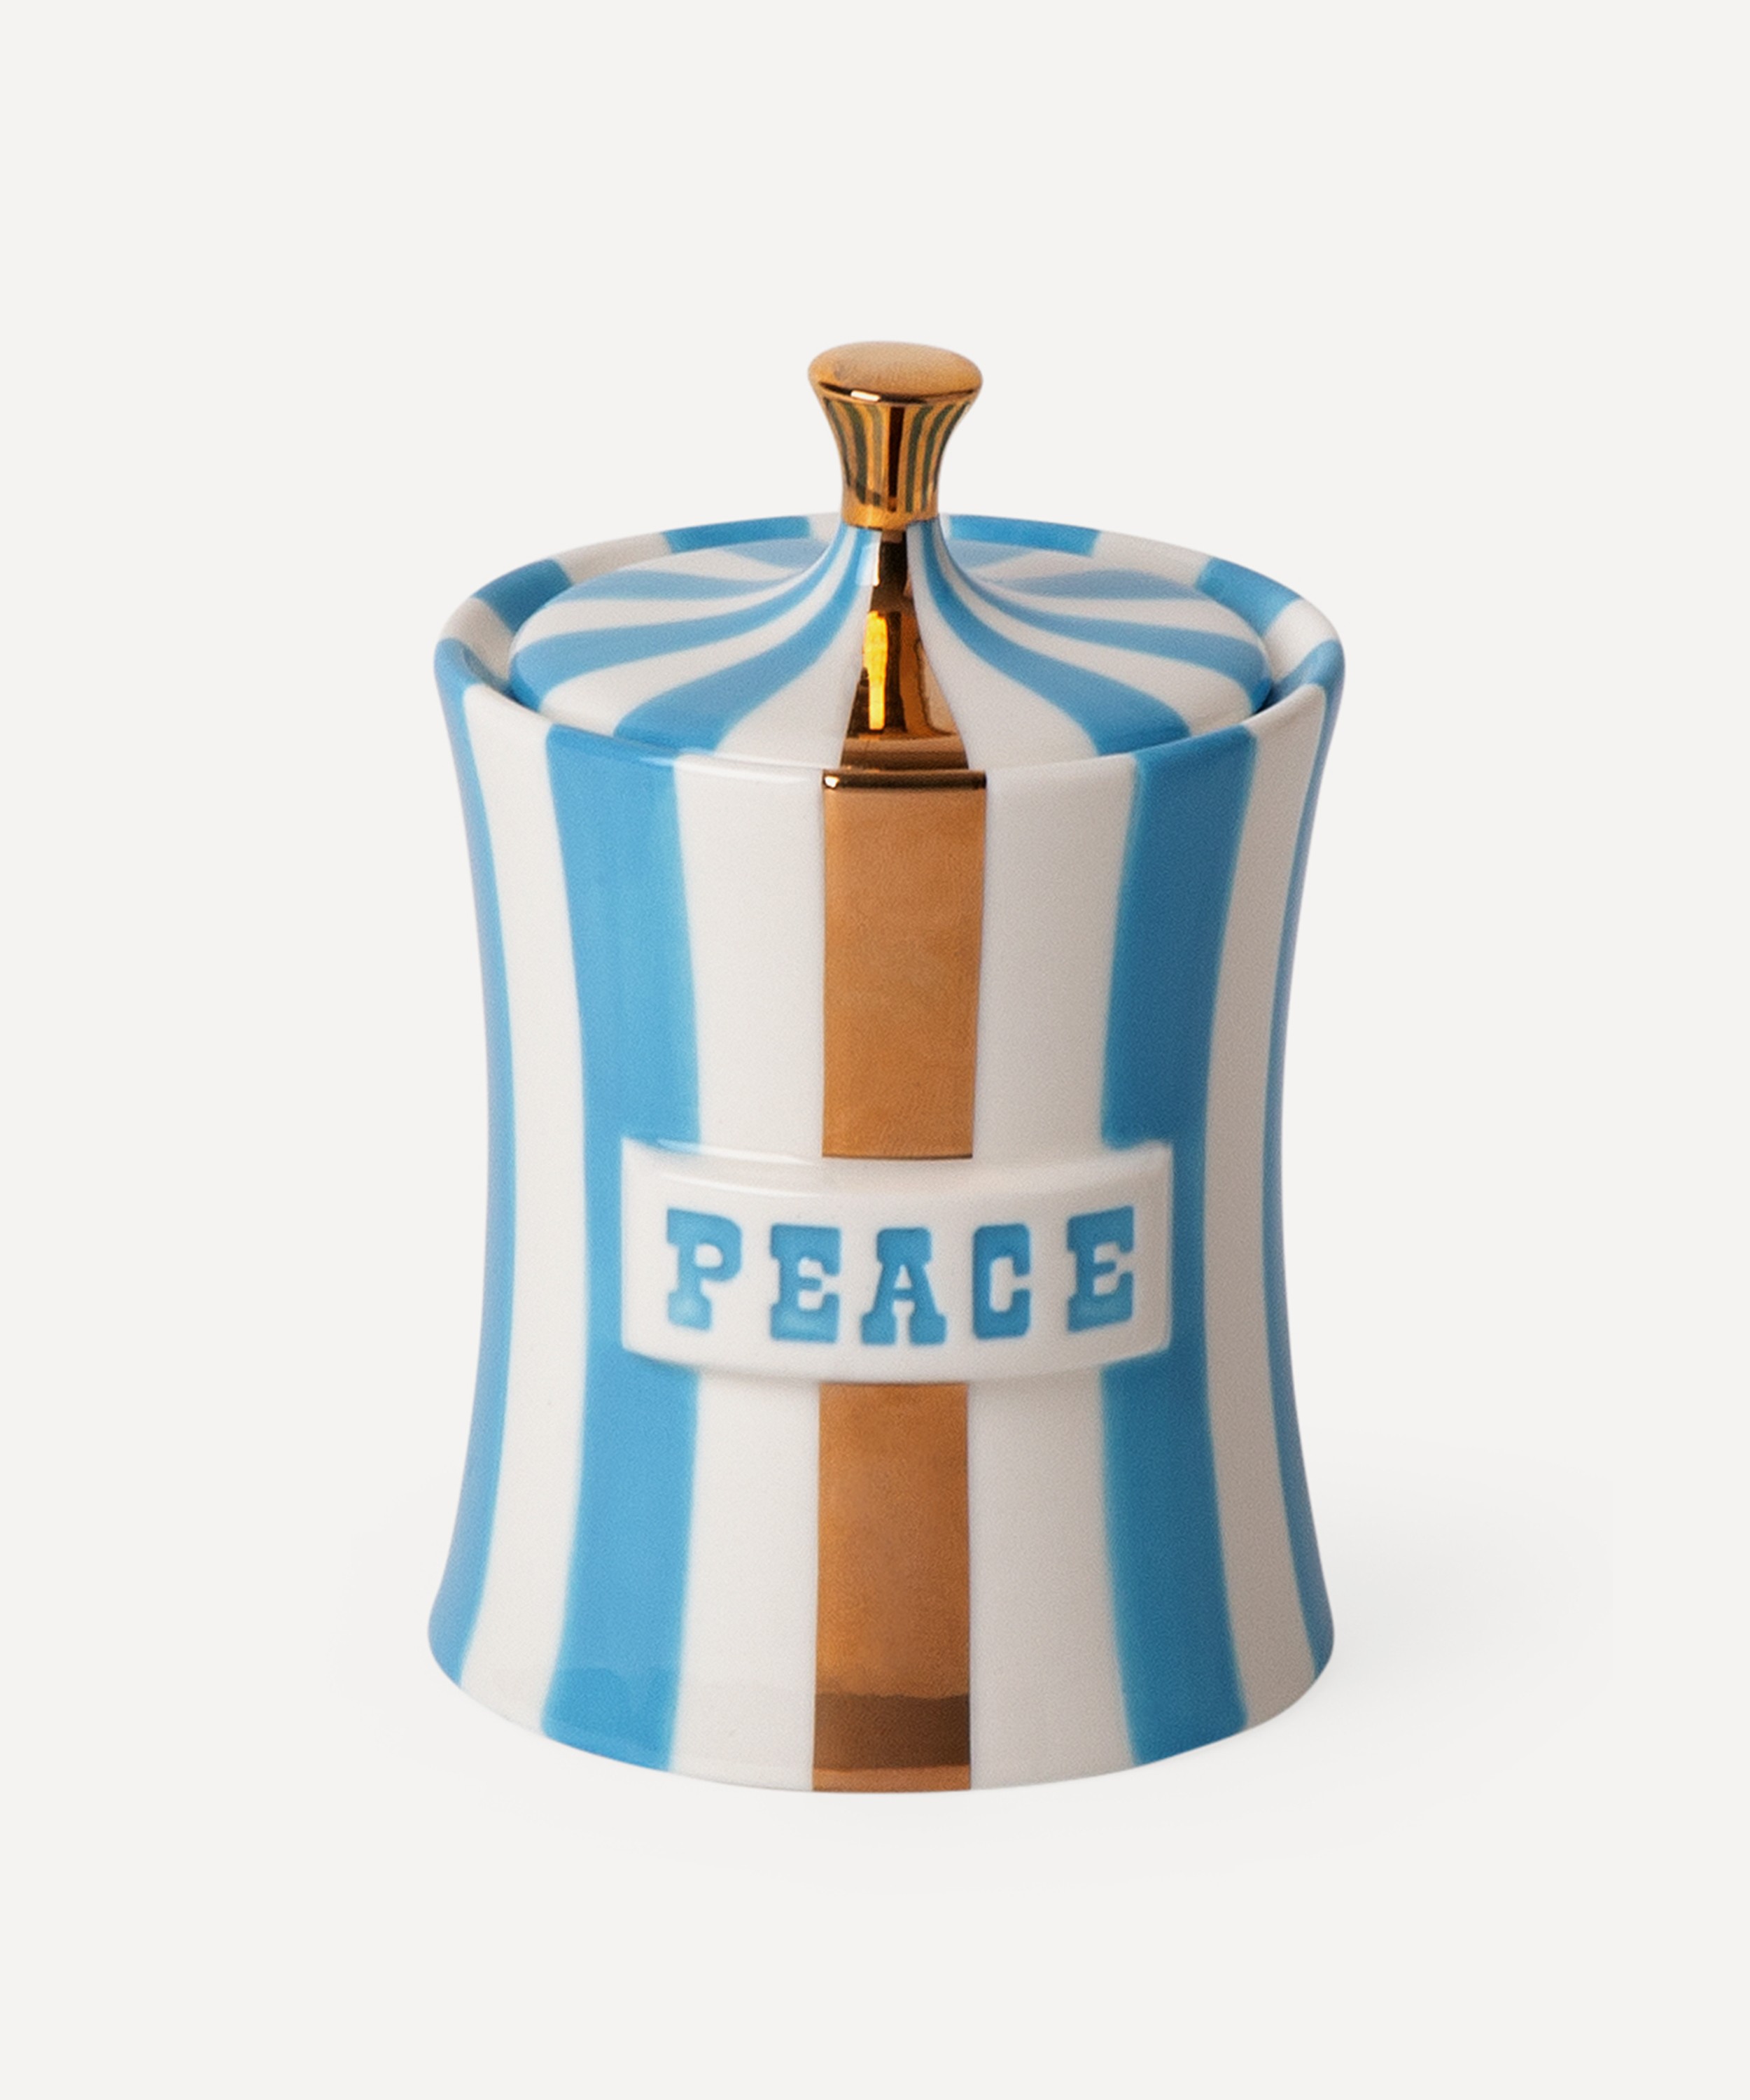 Jonathan Adler - Vice Gilded Peace Candle image number 0